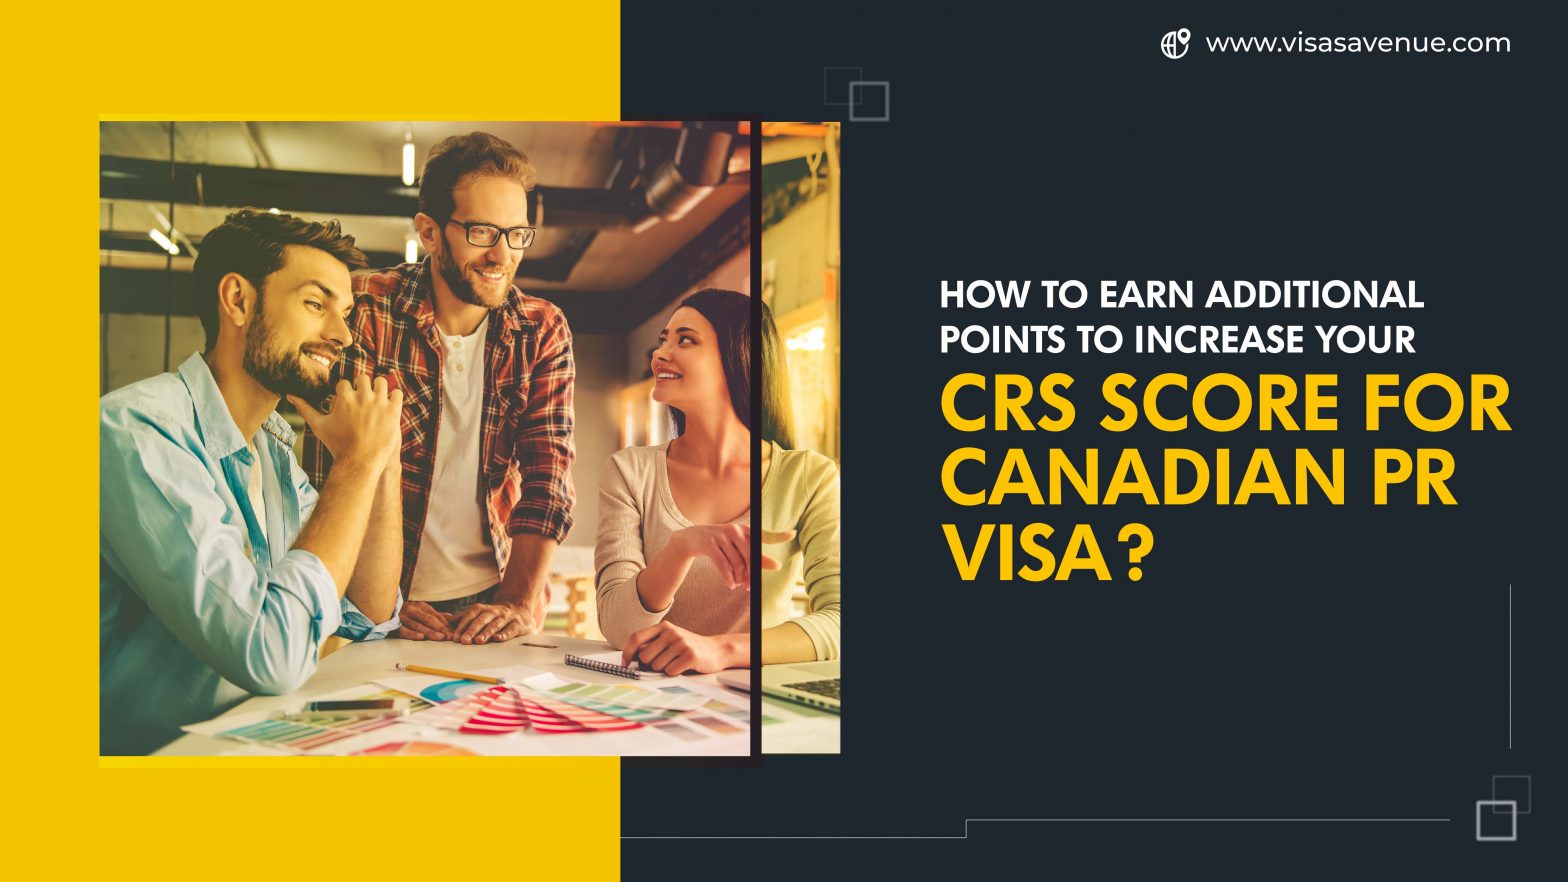 How to Earn Additional points to increase your CRS score for Canadian PR visa